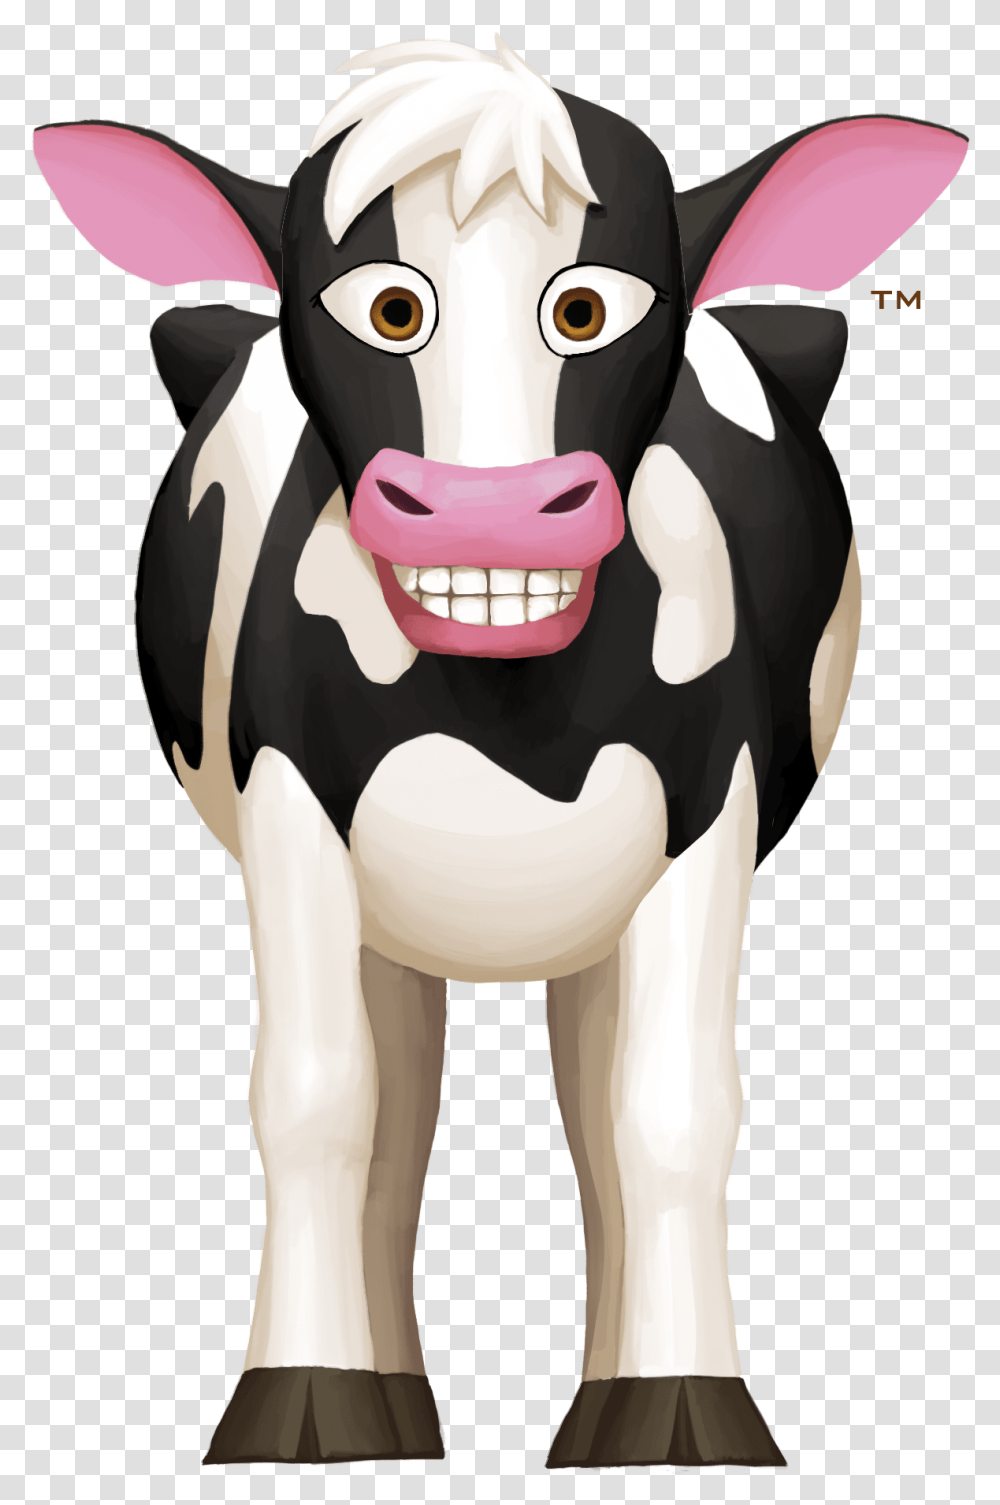 Angry Cow Clipart Full Size Clipart 4201969 Pinclipart Angry Cow Cartoon, Cattle, Mammal, Animal, Dairy Cow Transparent Png